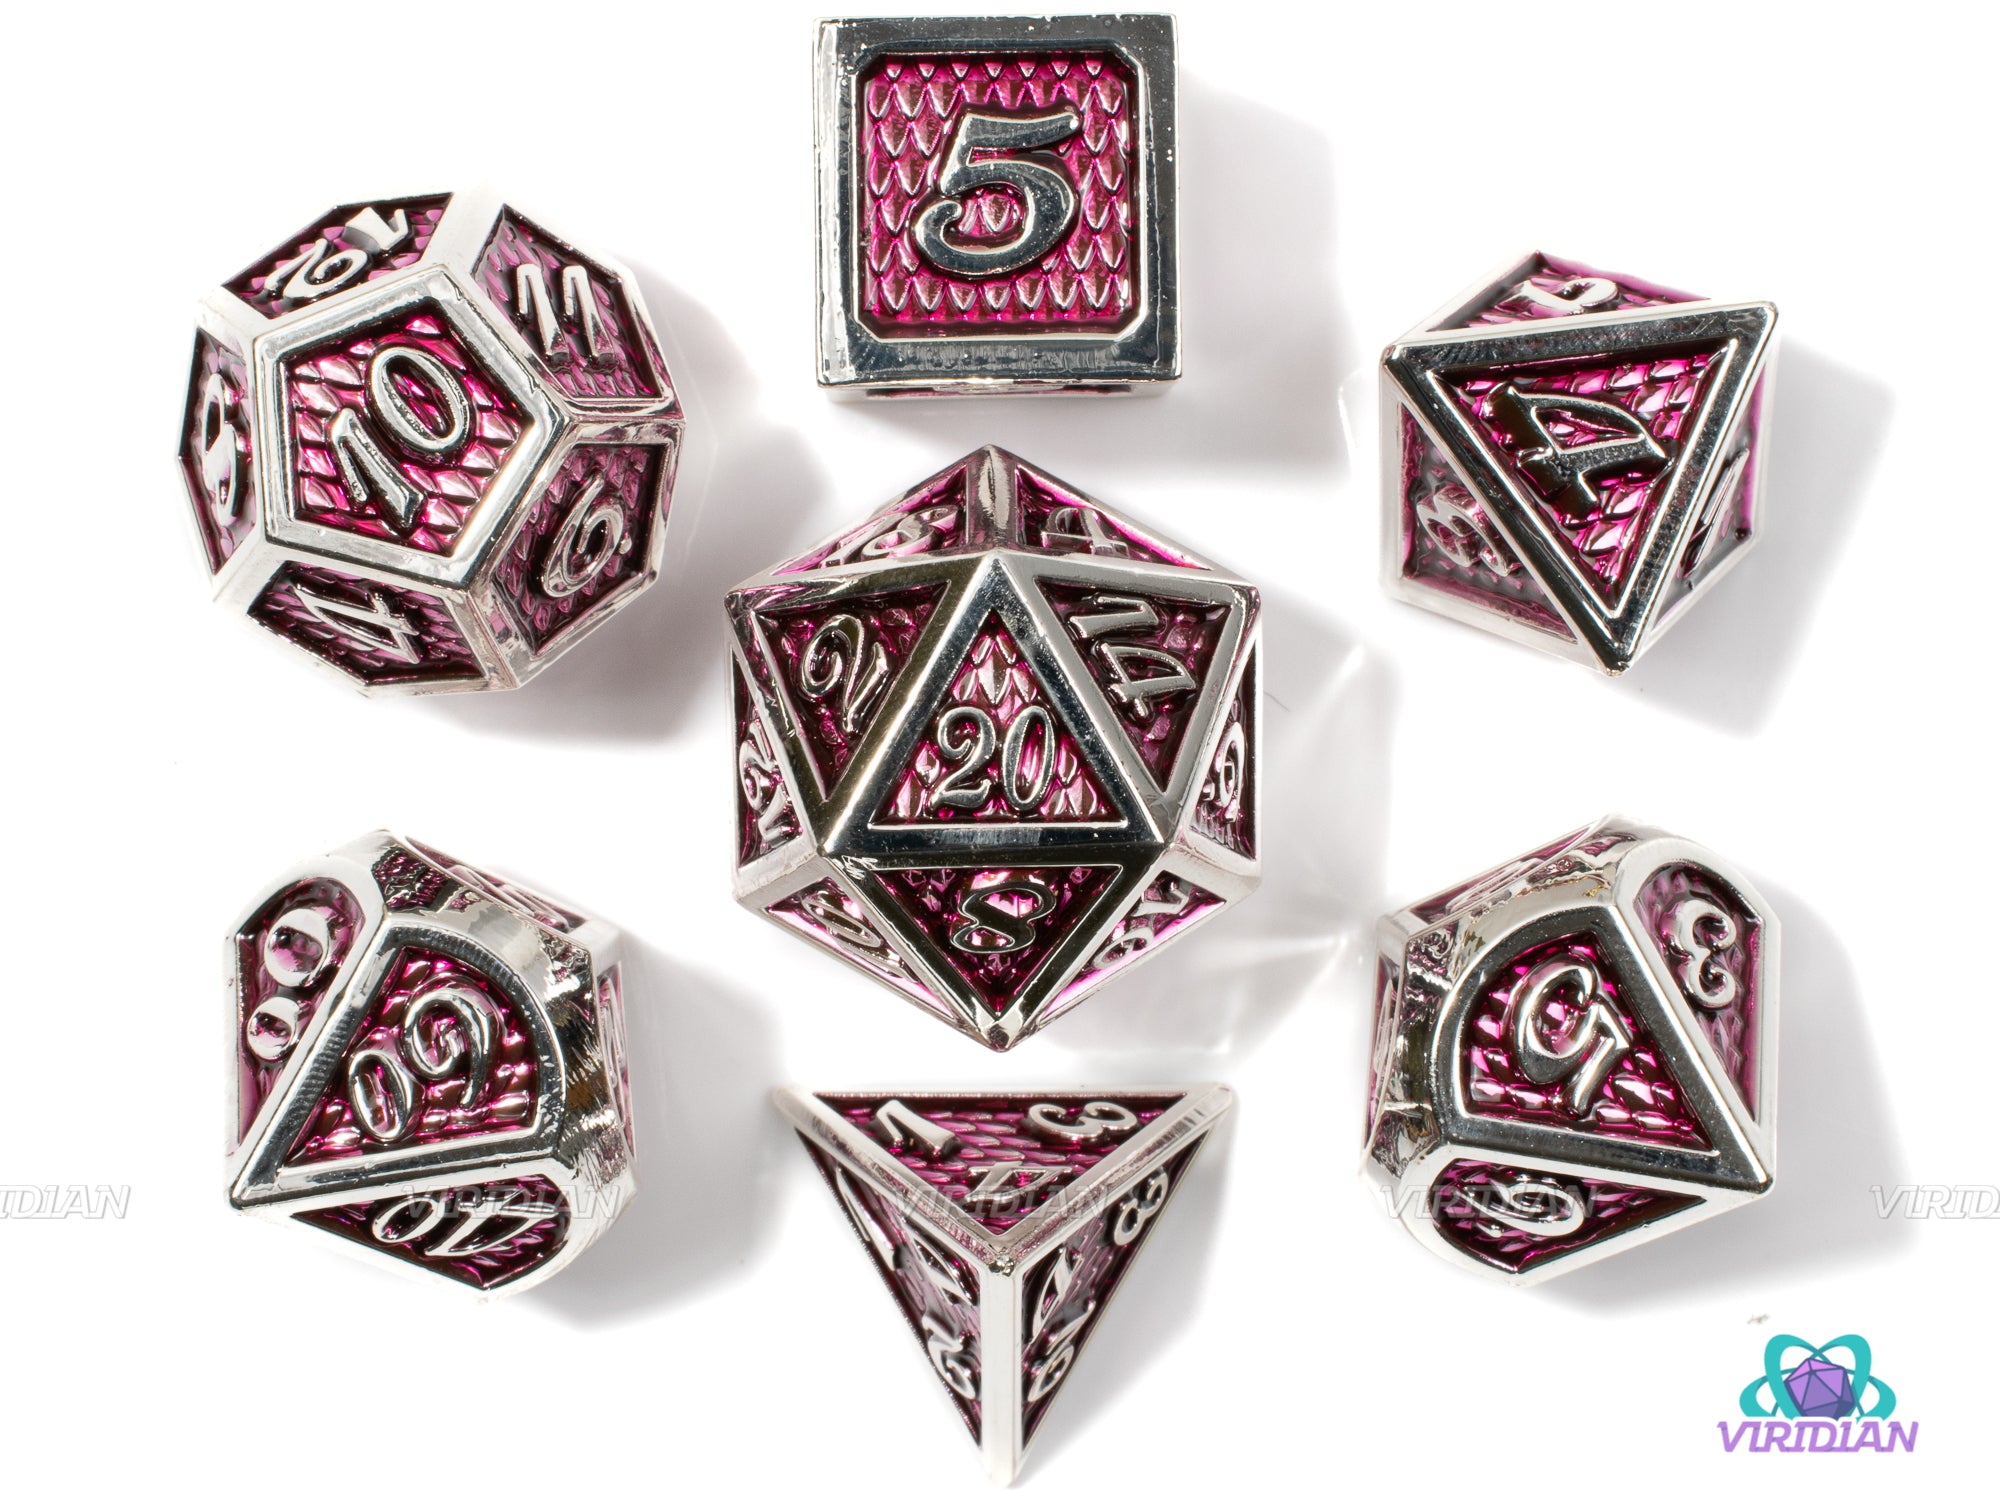 Amethyst Dragon | Magenta-Purple Scales Large Metal Dice Set (7) | Dungeons and Dragons (DnD) | Tabletop RPG Gaming